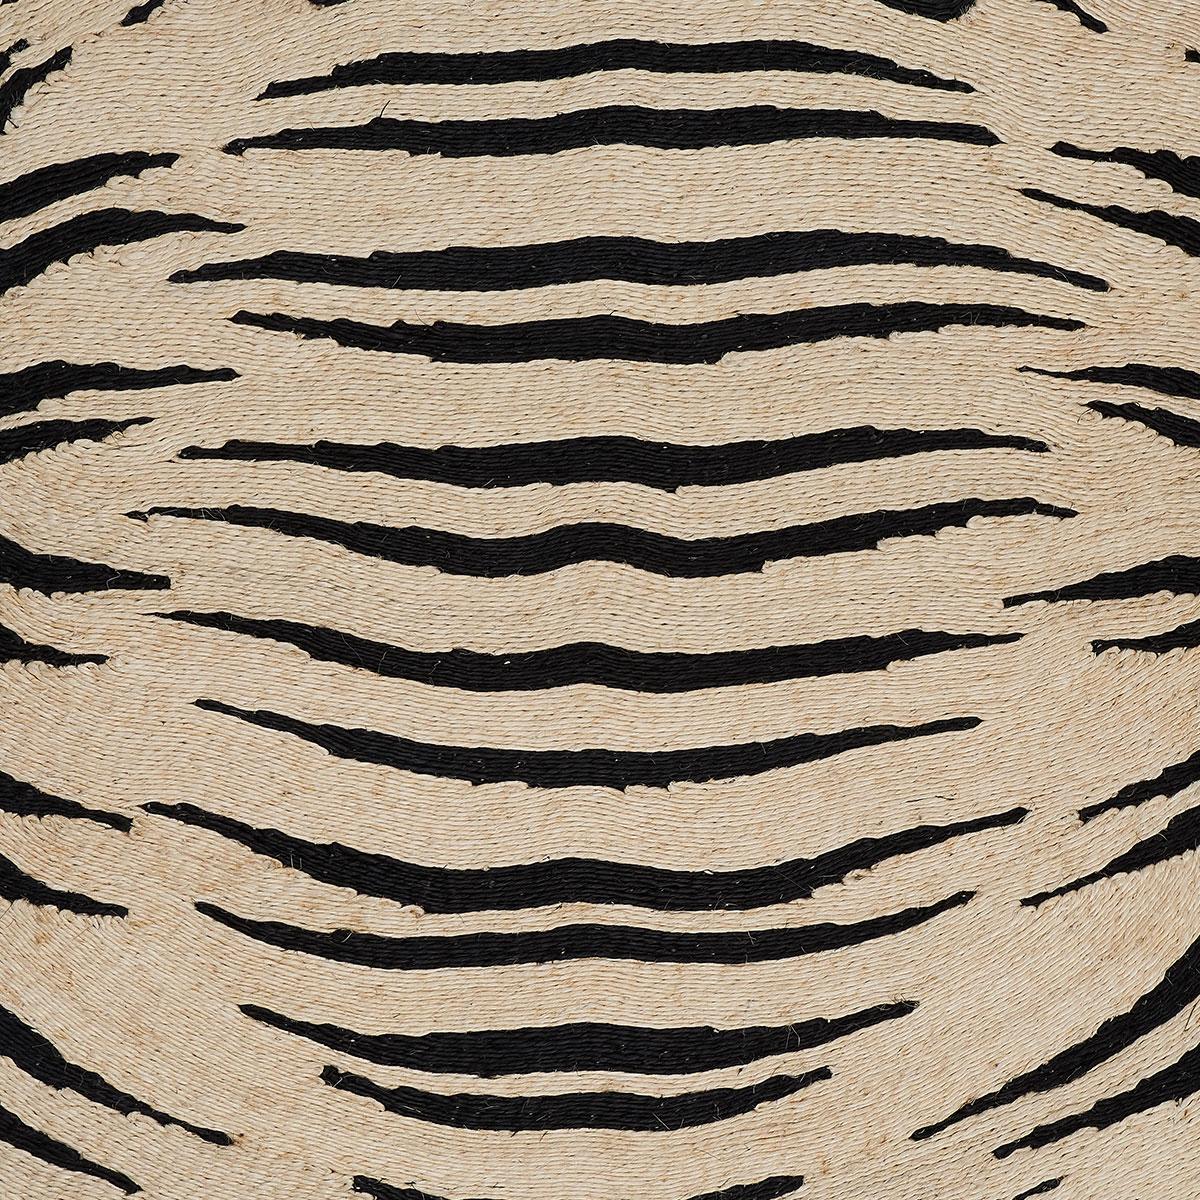 Designed by Adam Charlap Hyman and inspired by 17th-century cabinets of curiosity, Tigre is a fanciful, uniquely modern take on a tiger trophy rug. Featuring black and natural-colored stripes formed from hand-coiled abaca, this rug defines animal